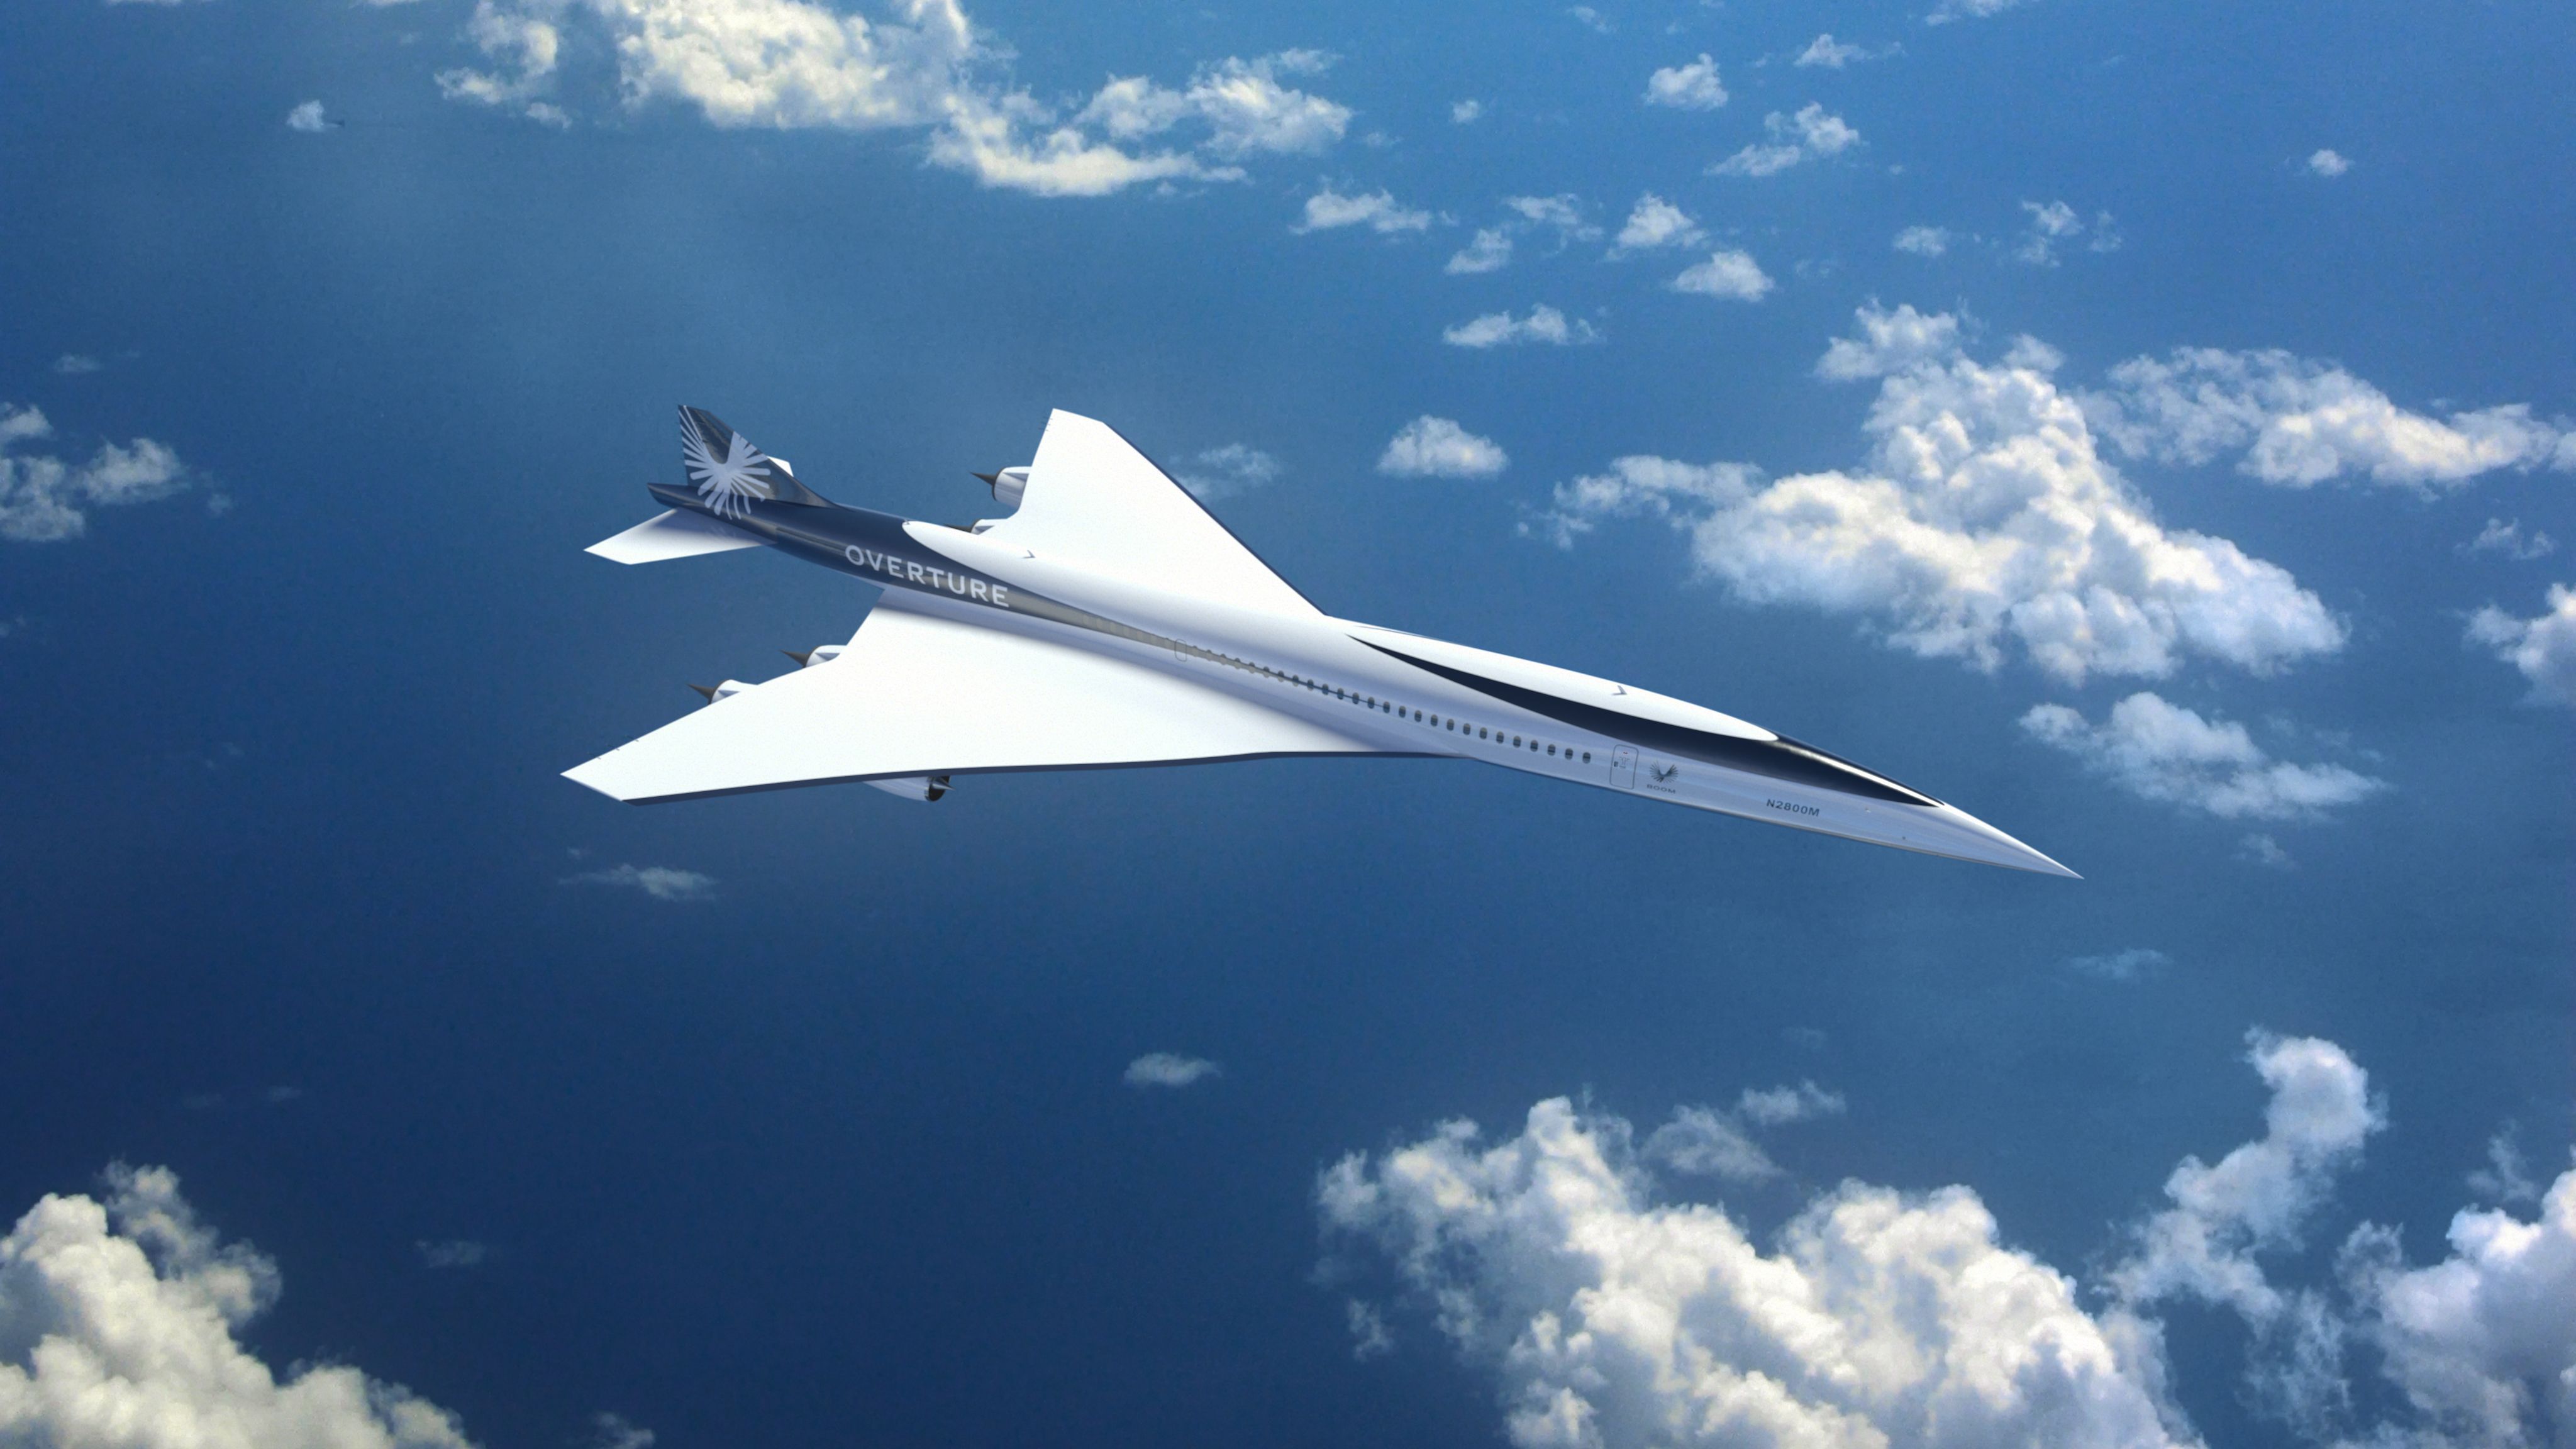 A render of Boom's Overture supersonic aircraft.